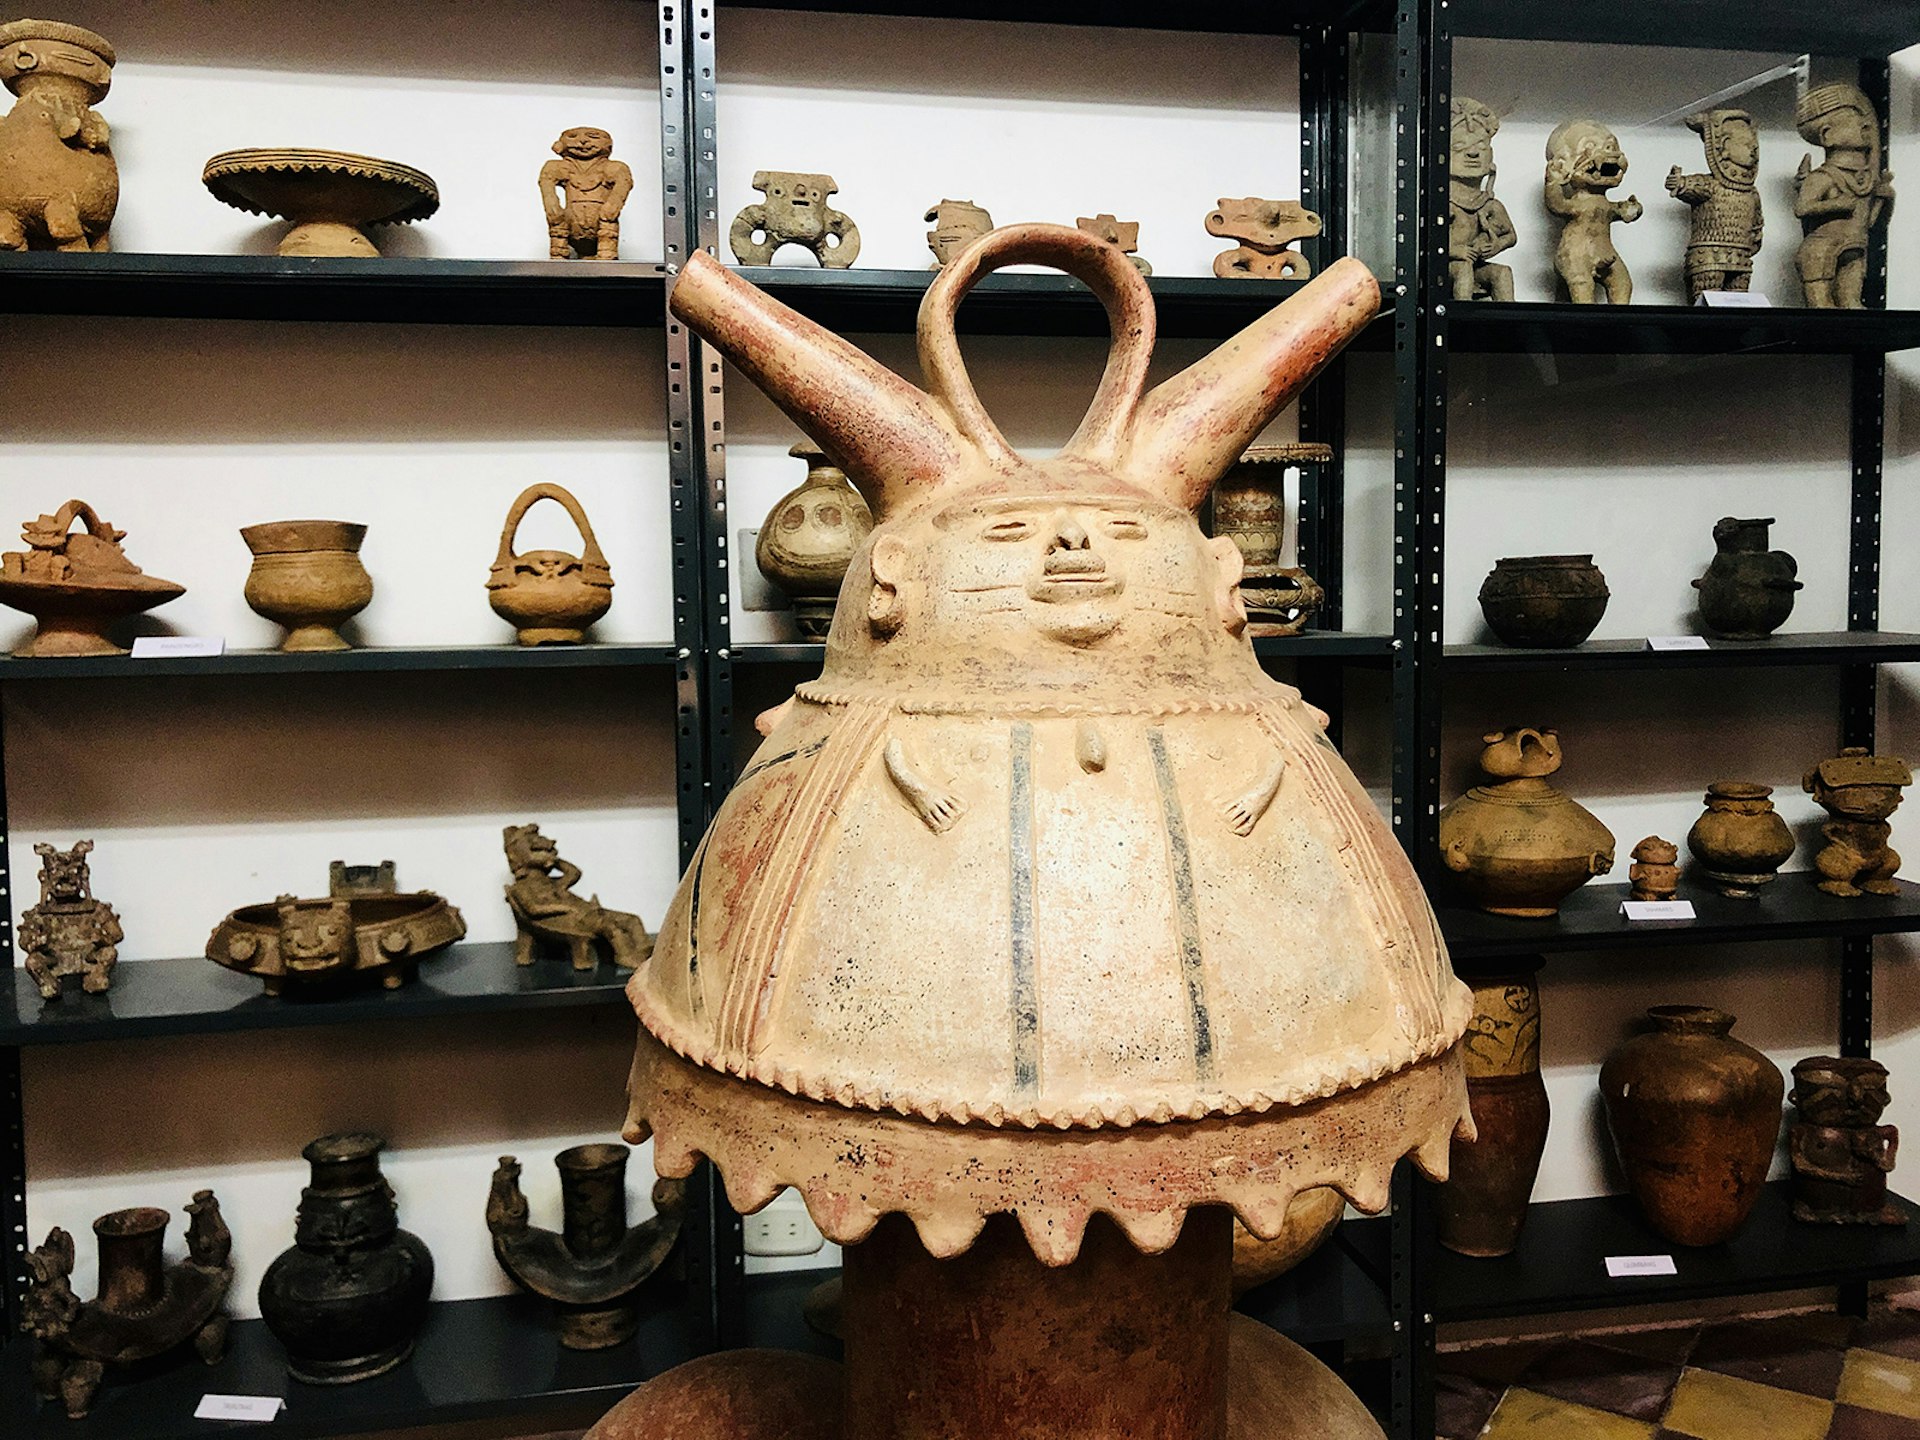 A large light-colored, bell-shaped artifact in the likeness of a big-bellied man is positioned in front of three selves containing a collection of smaller artifacts in Medellín, Colombia. 